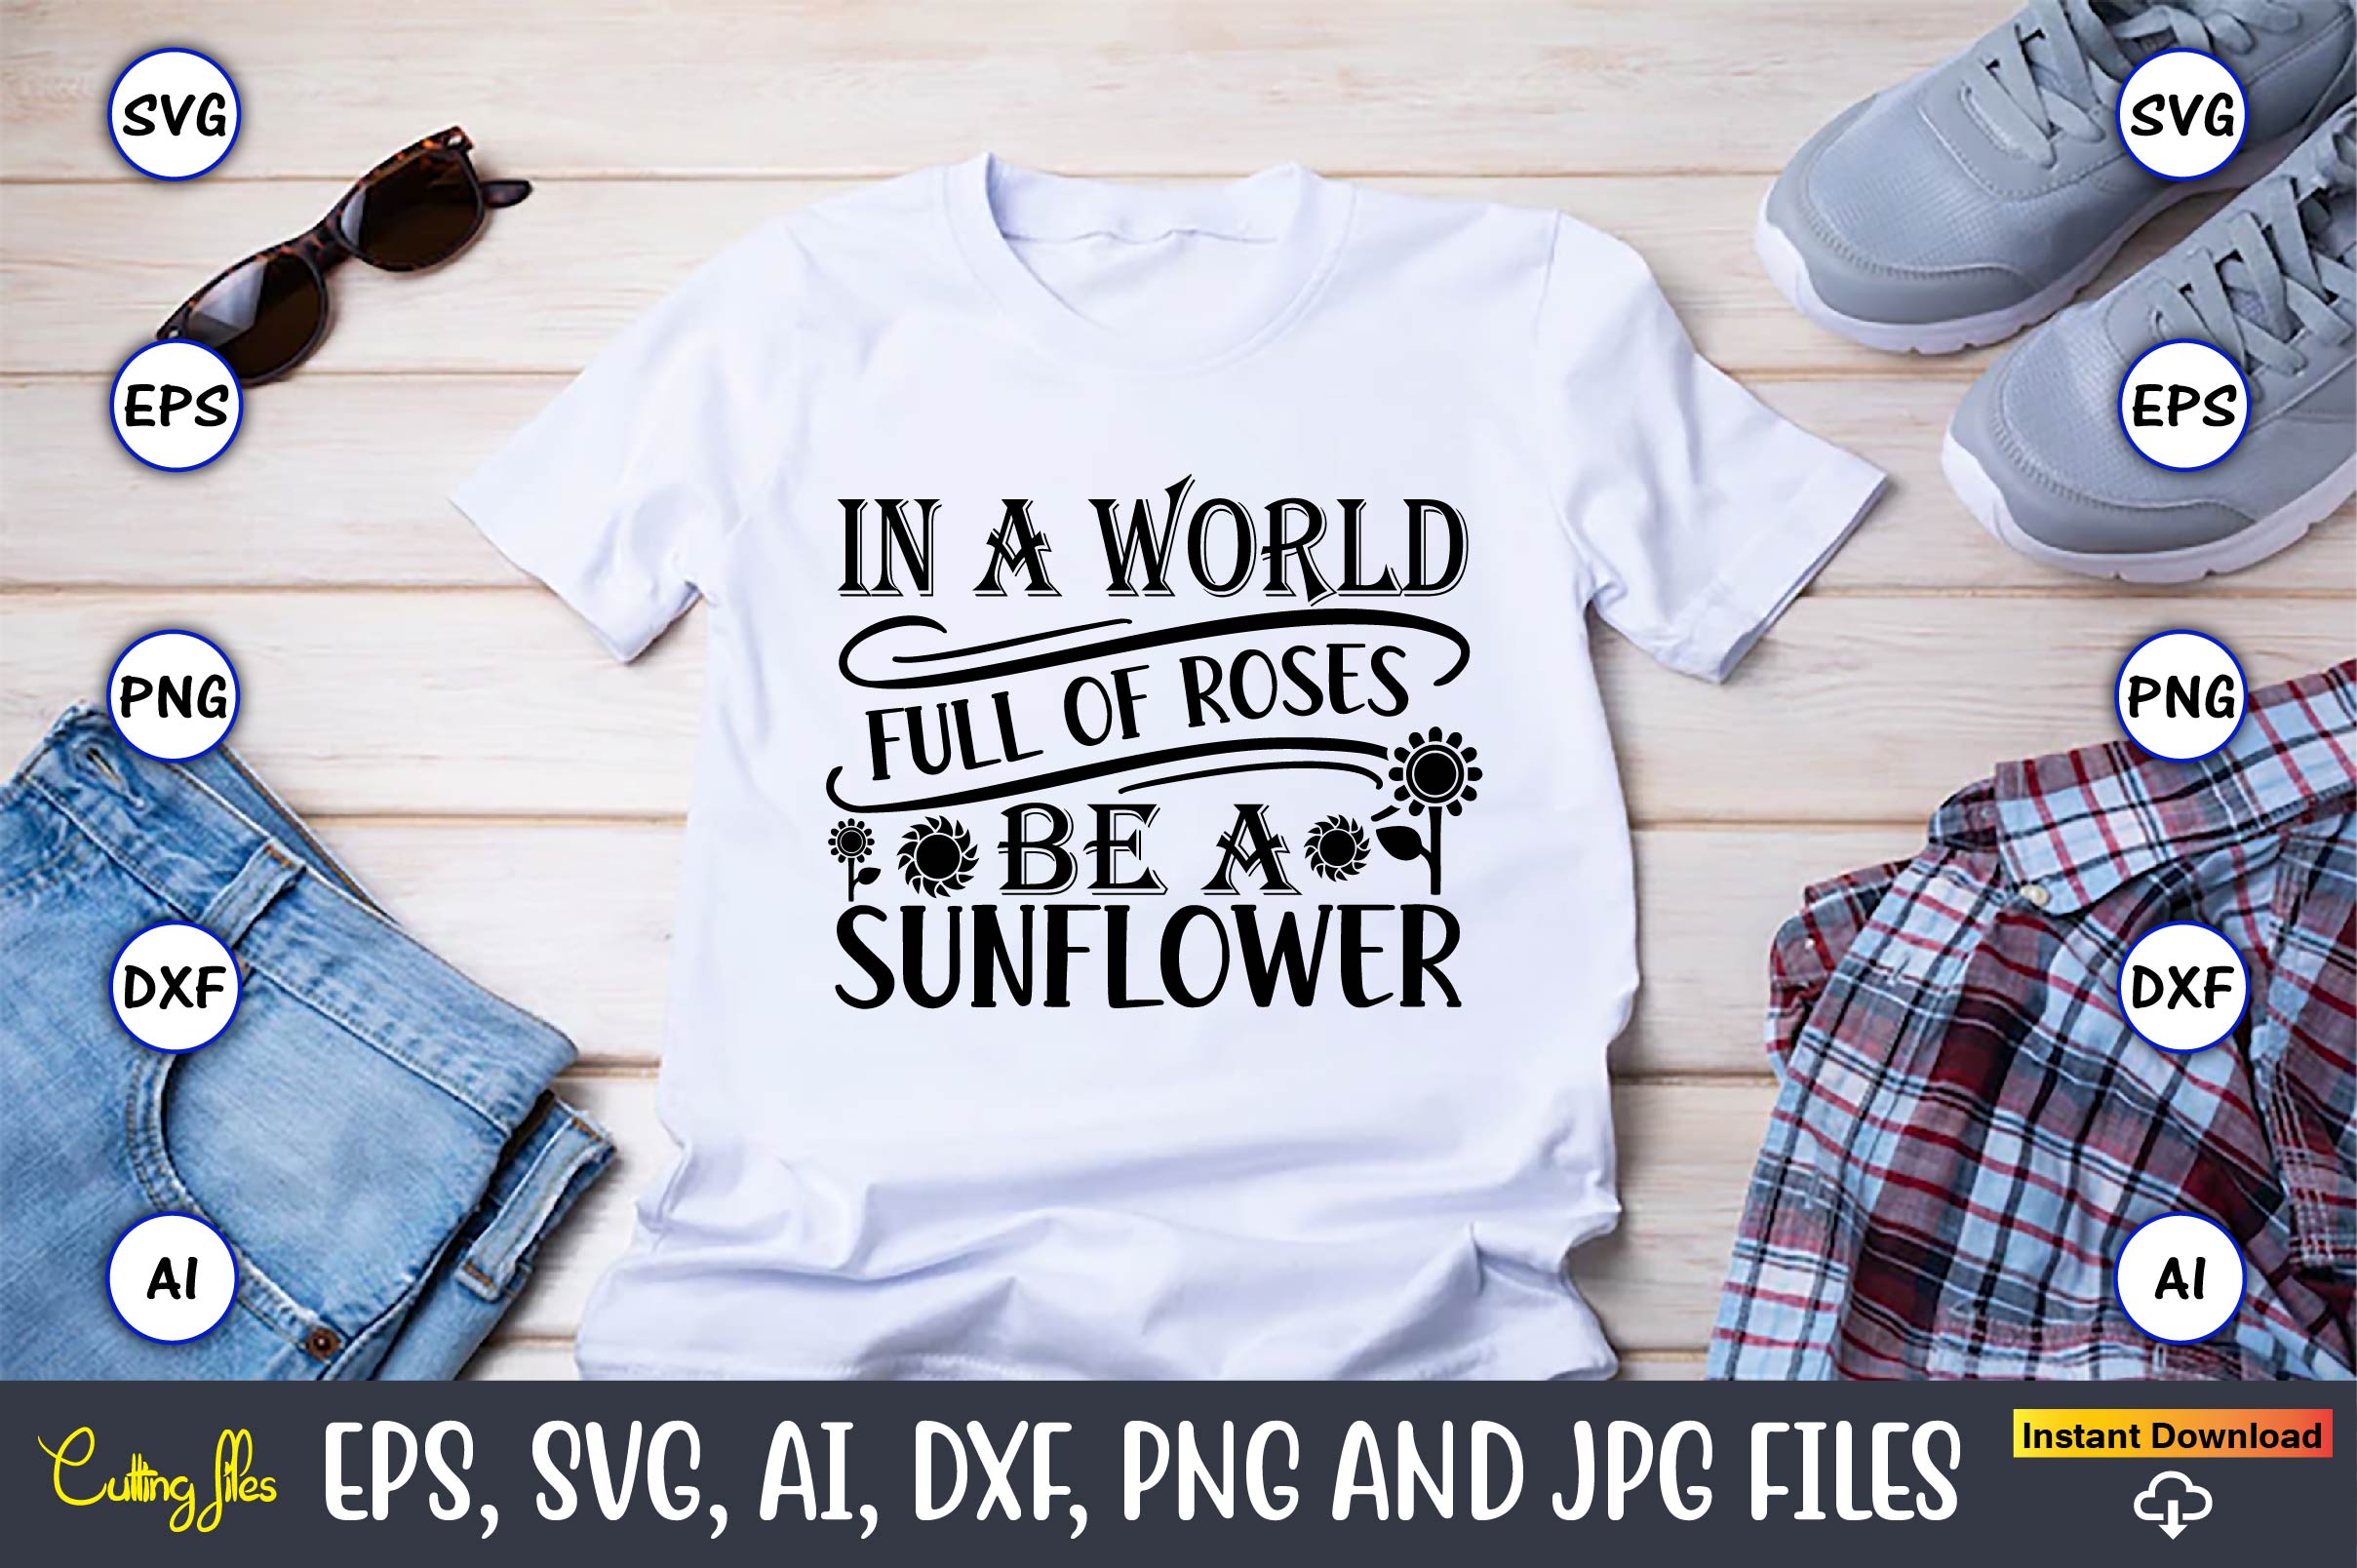 Image of a white t-shirt with an enchanting inscription In a world full of roses be a sunflower.